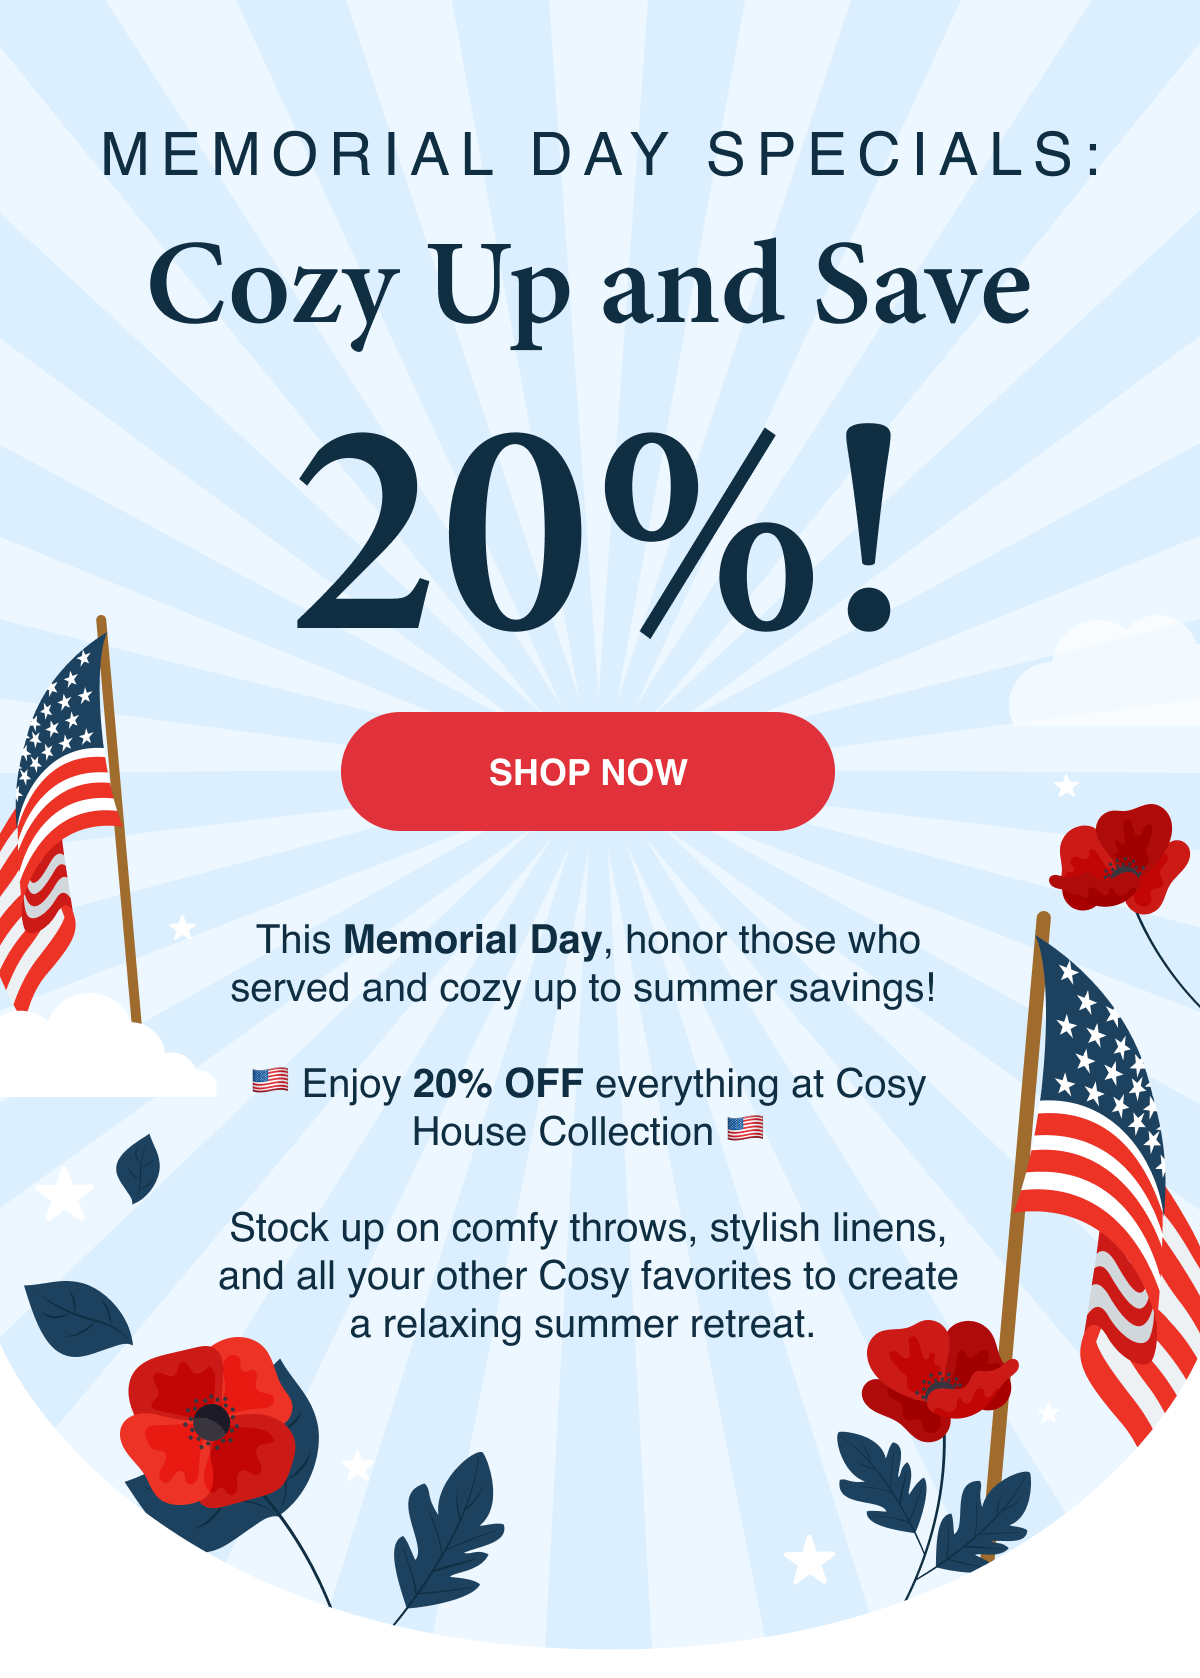 Memorial Day Specials: Cozy up and save 20%!